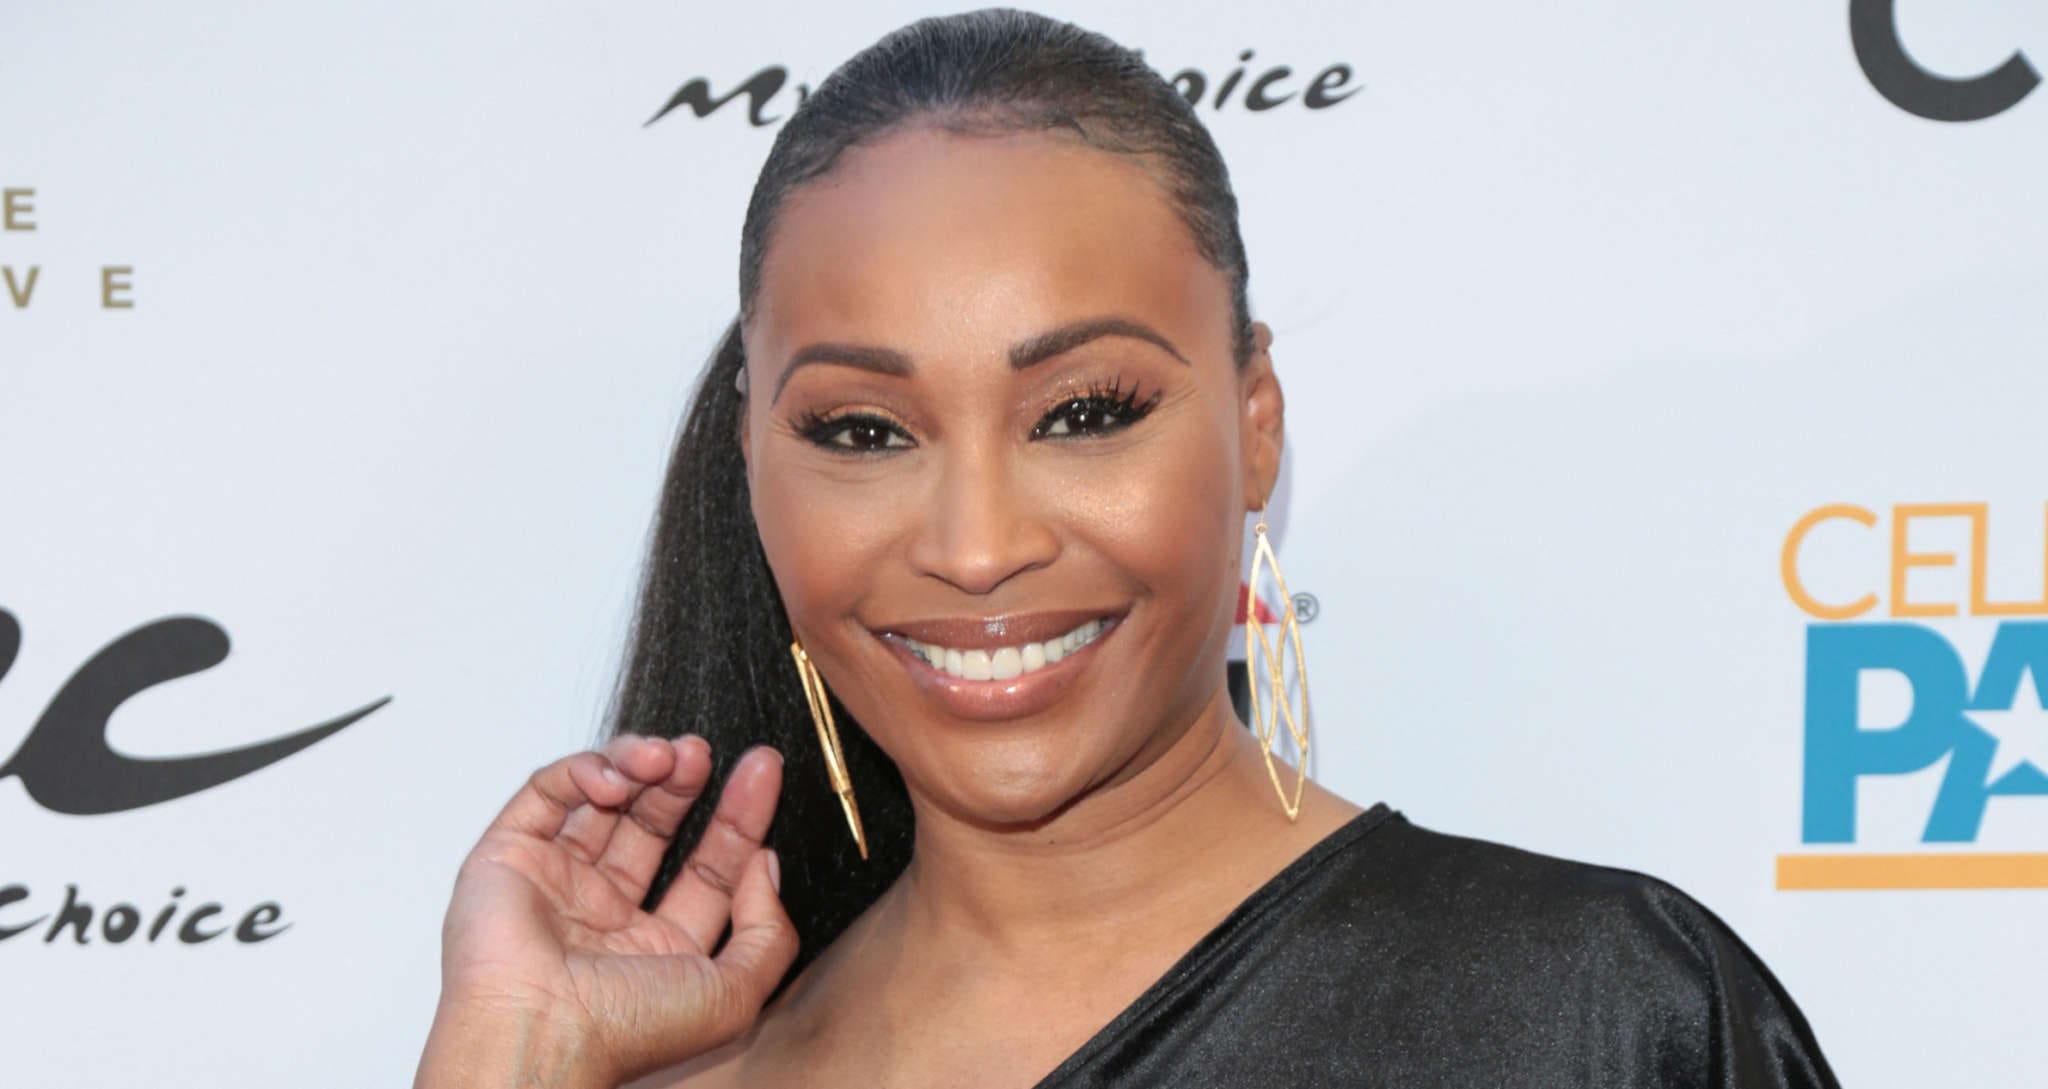 Cynthia Bailey Cuts Her Hair Short And Fans Are In Love With Her New Look